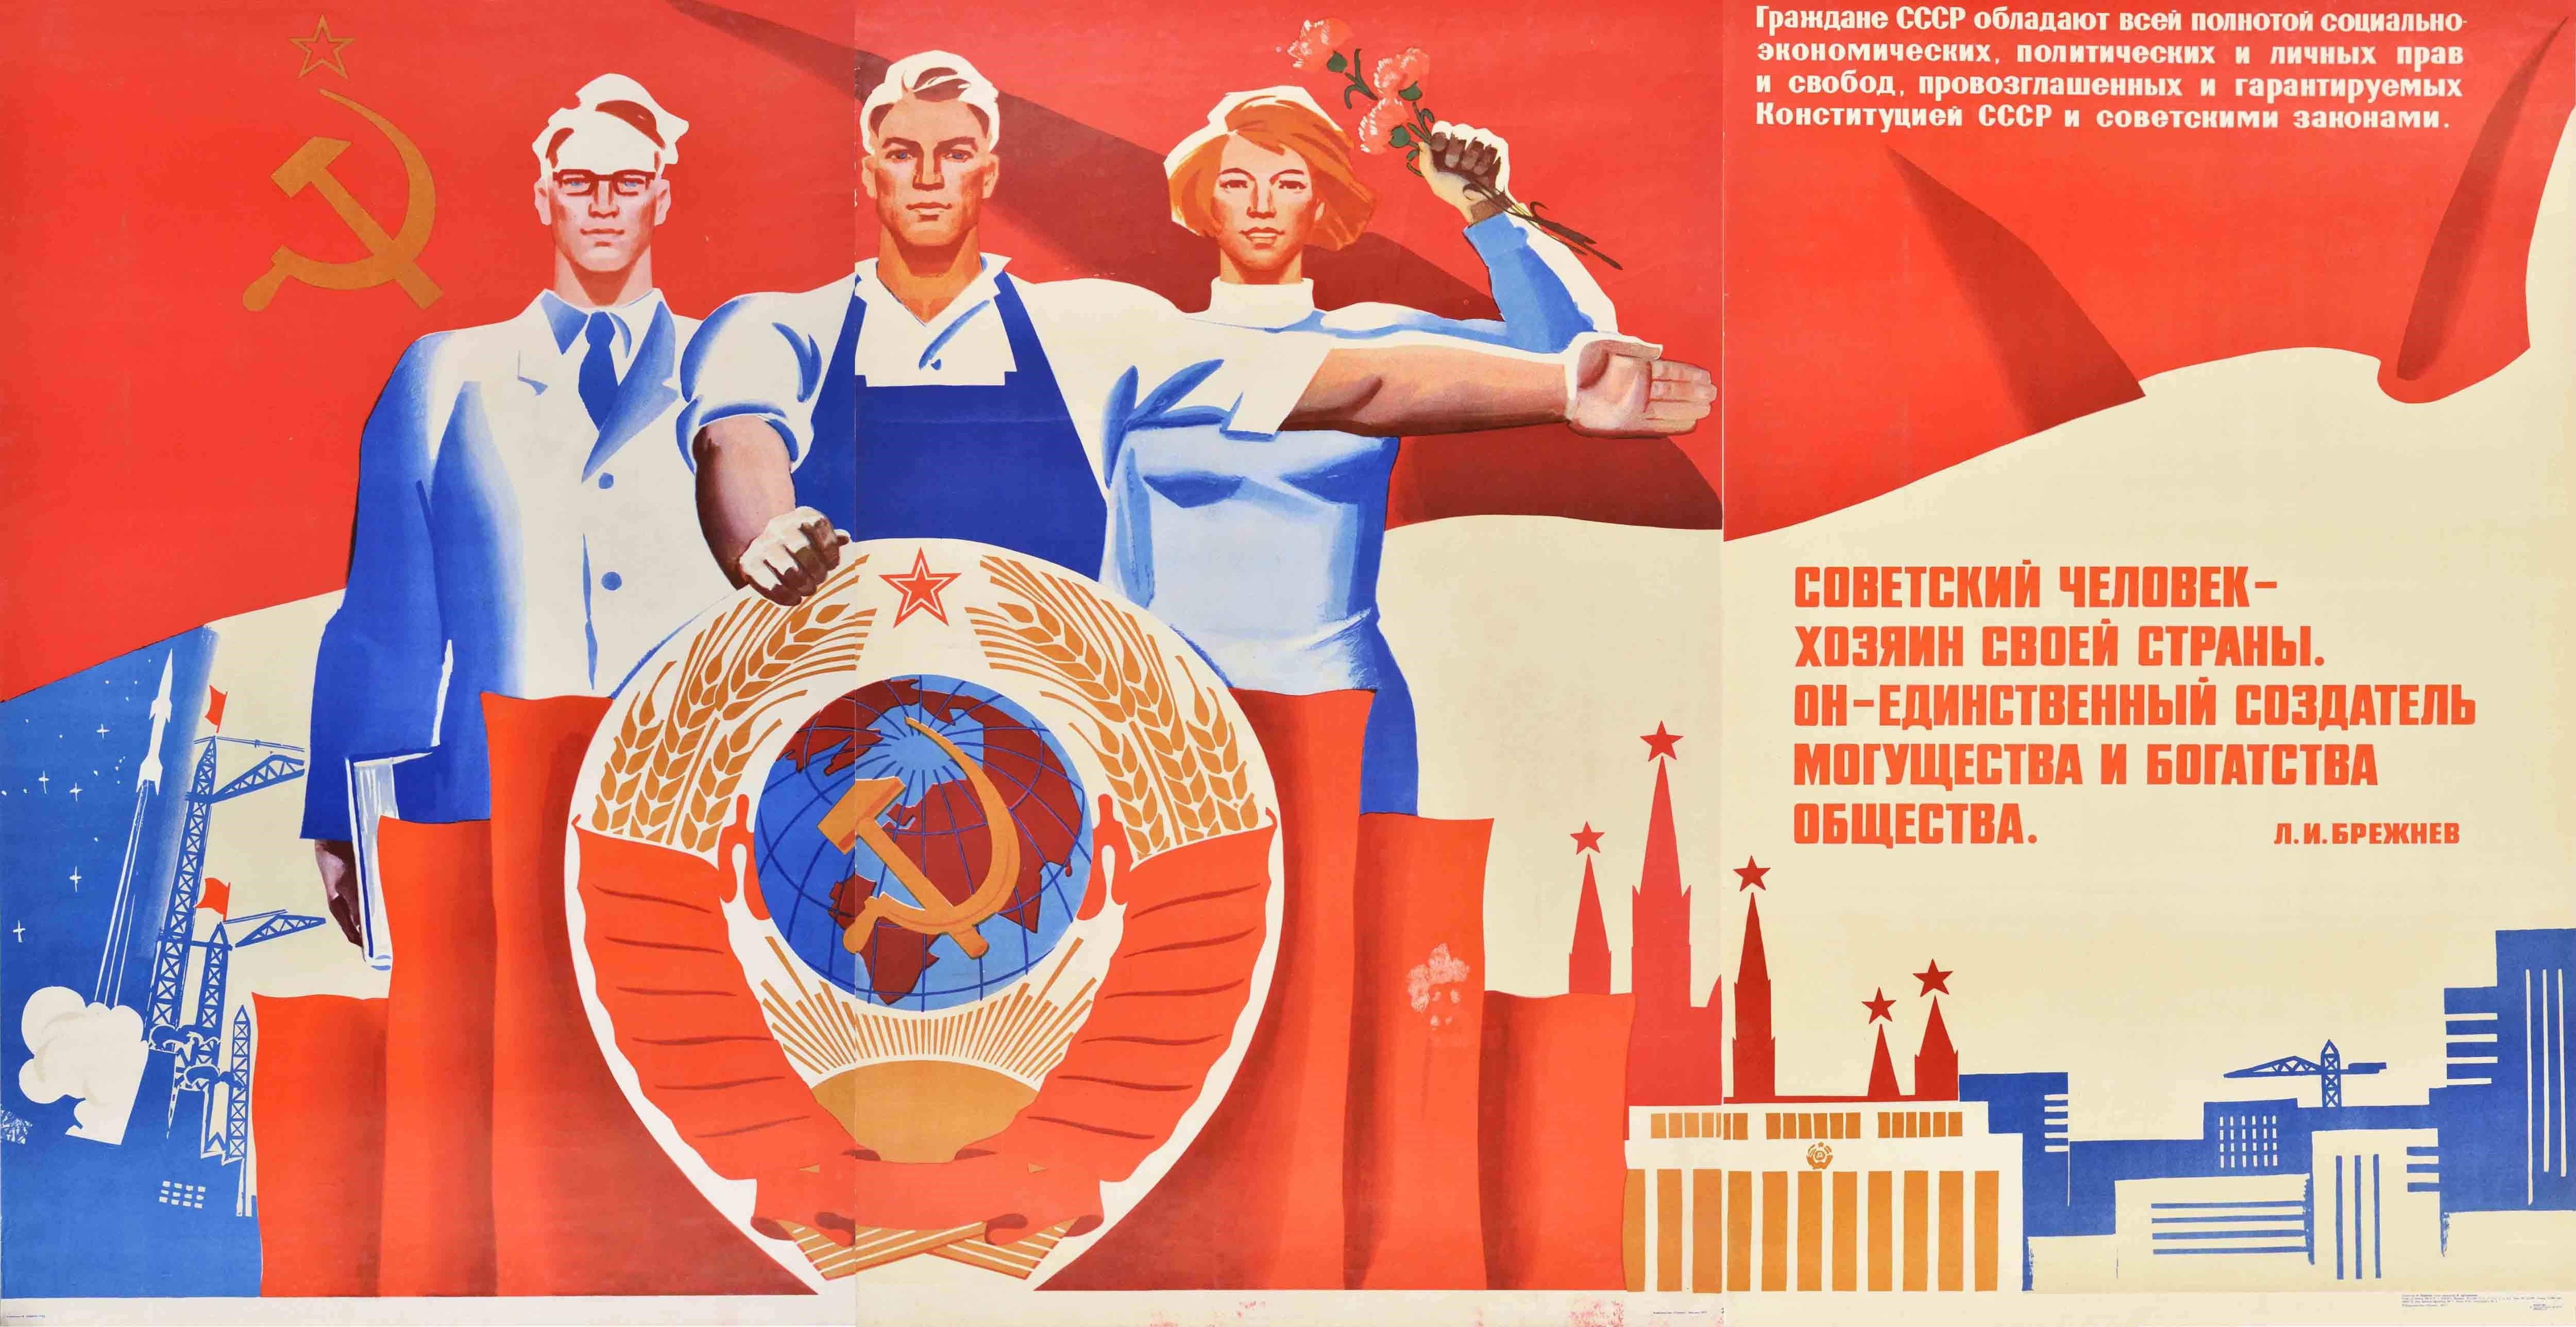 Original vintage Soviet propaganda poster featuring a man in a suit and science lab coat holding a book and standing behind the State Emblem of the Soviet Union with a lady holding flowers and a worker pointing towards a quote reading - The Soviet